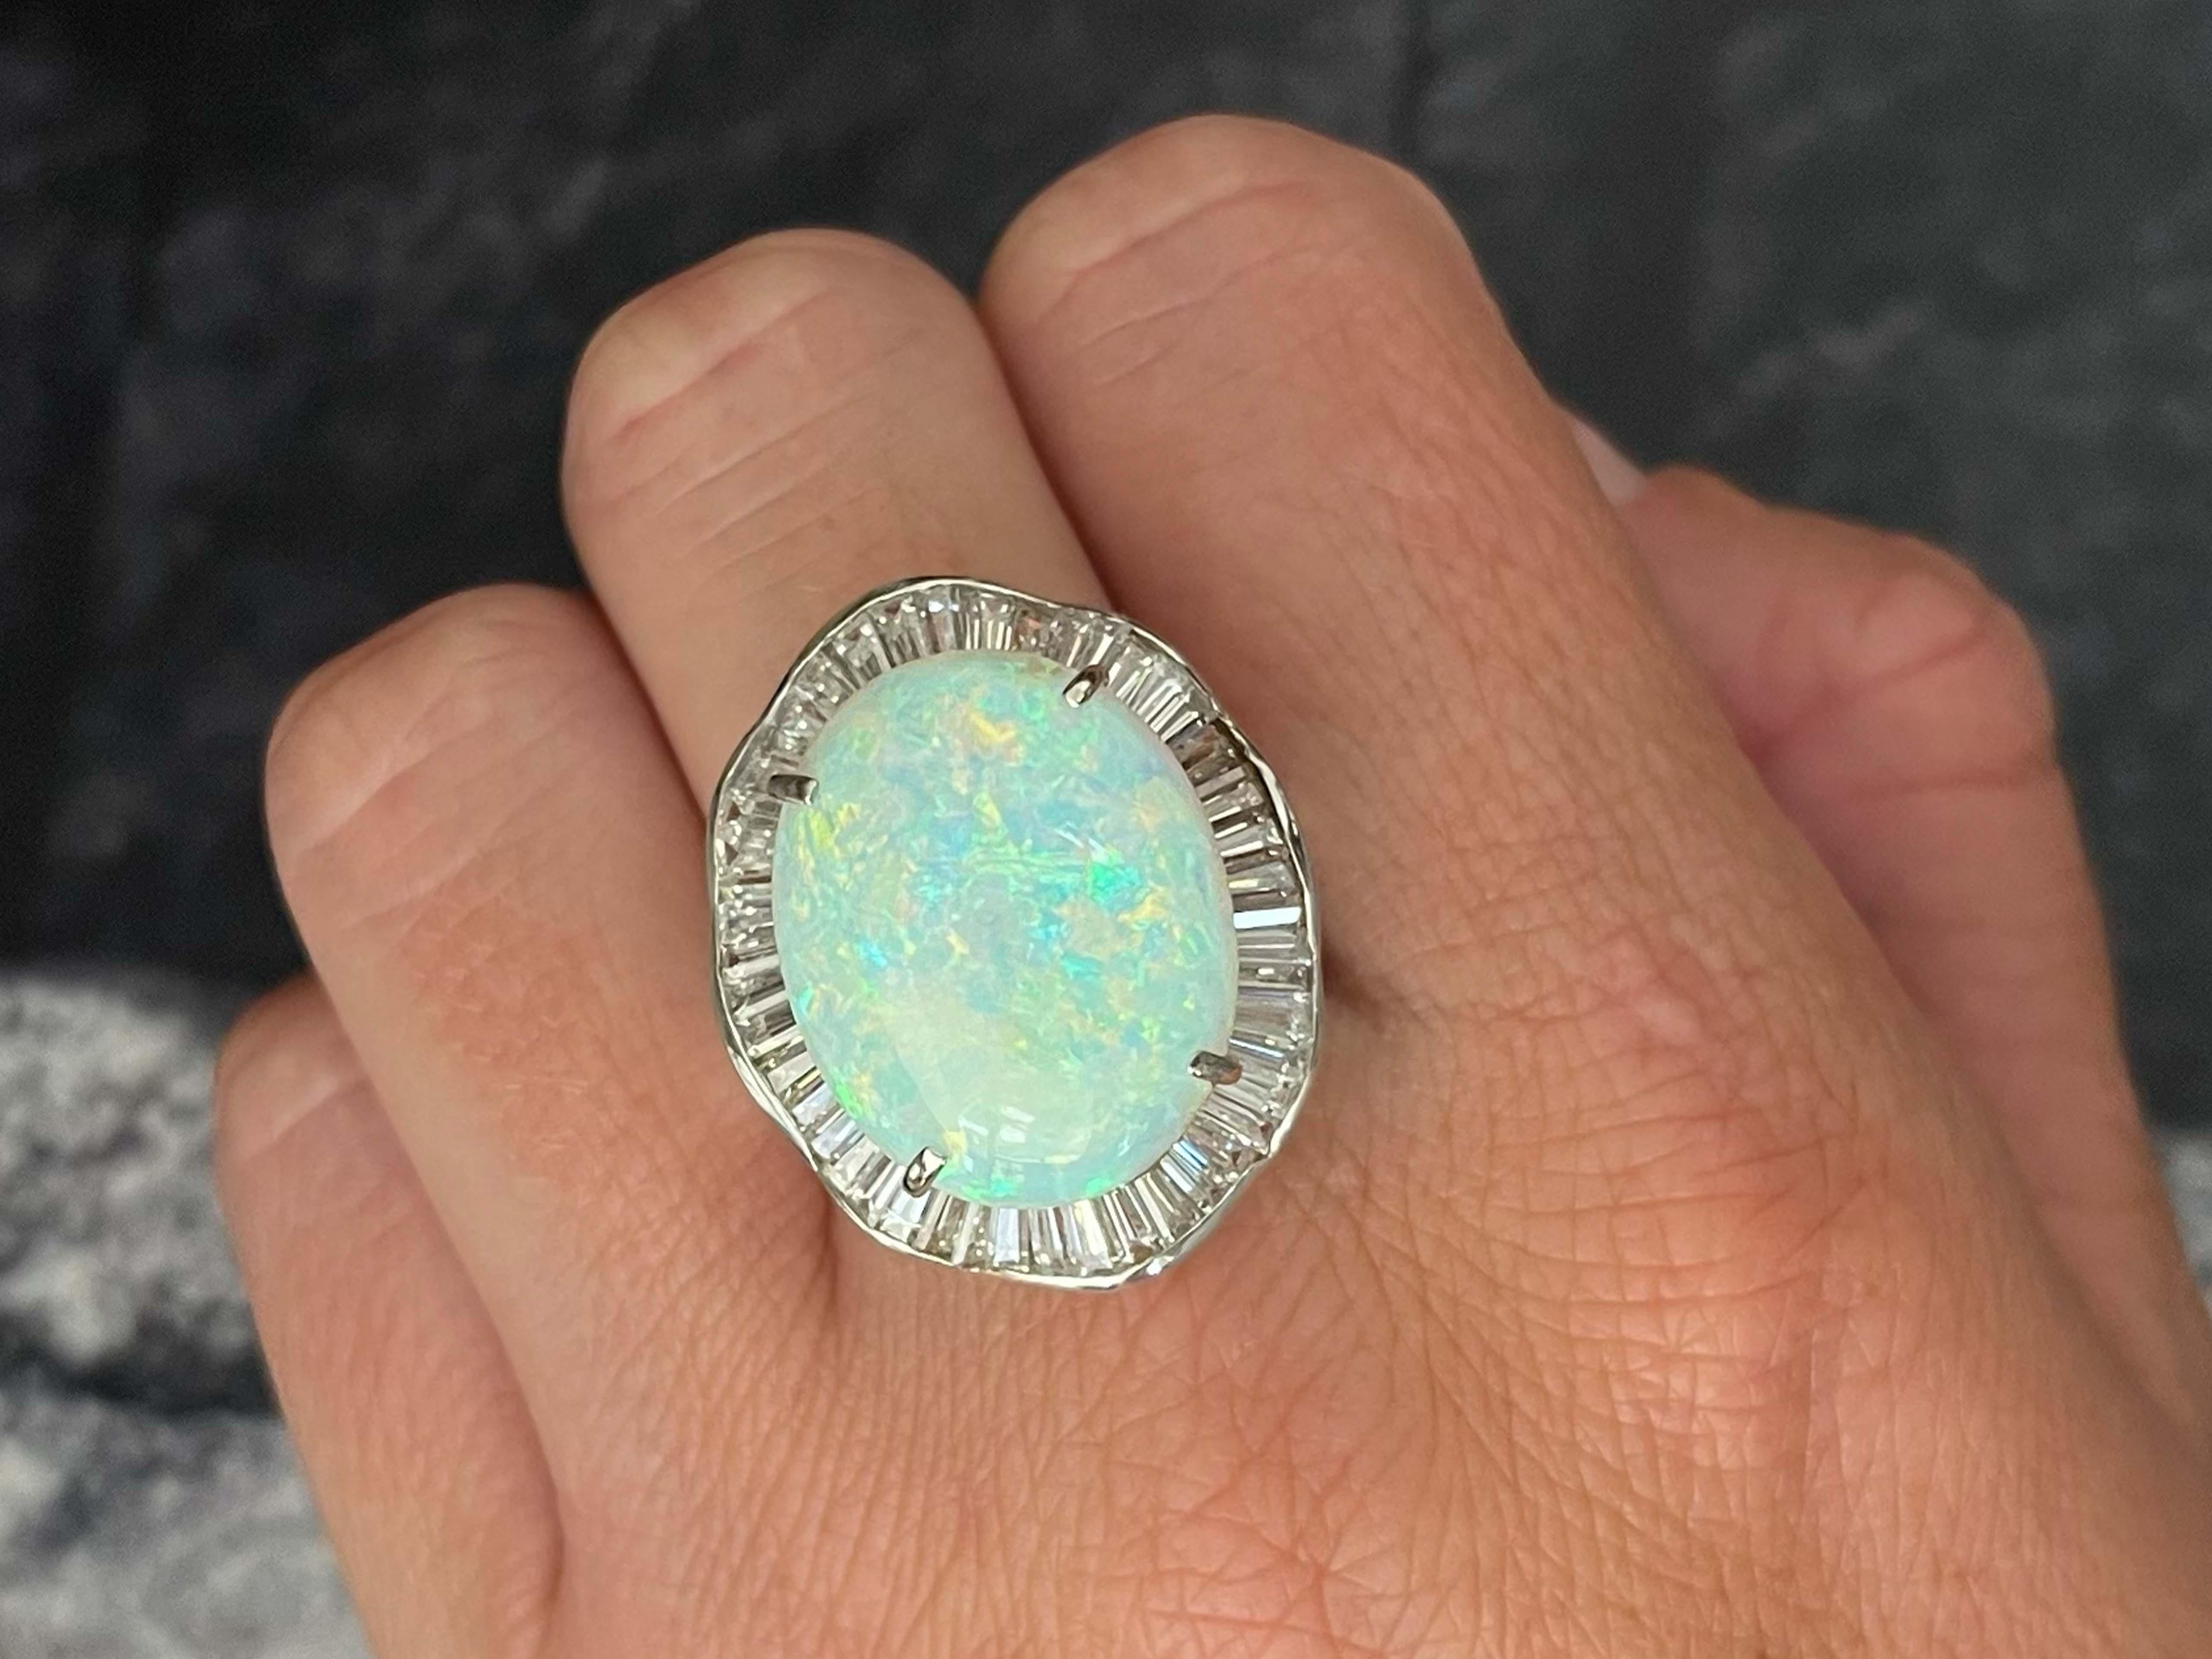 Item Specifications:

Metal: 14K White Gold 

Style: Opal and Diamond Ring

Total Weight: 11.3 Grams

Gemstone Specifications:

Center Gemstone: White Opal

Gemstone Measurements: 20.12 mm x 16.15 mm x 5.29 mm

Gemstone Carat Weight: ~9.75